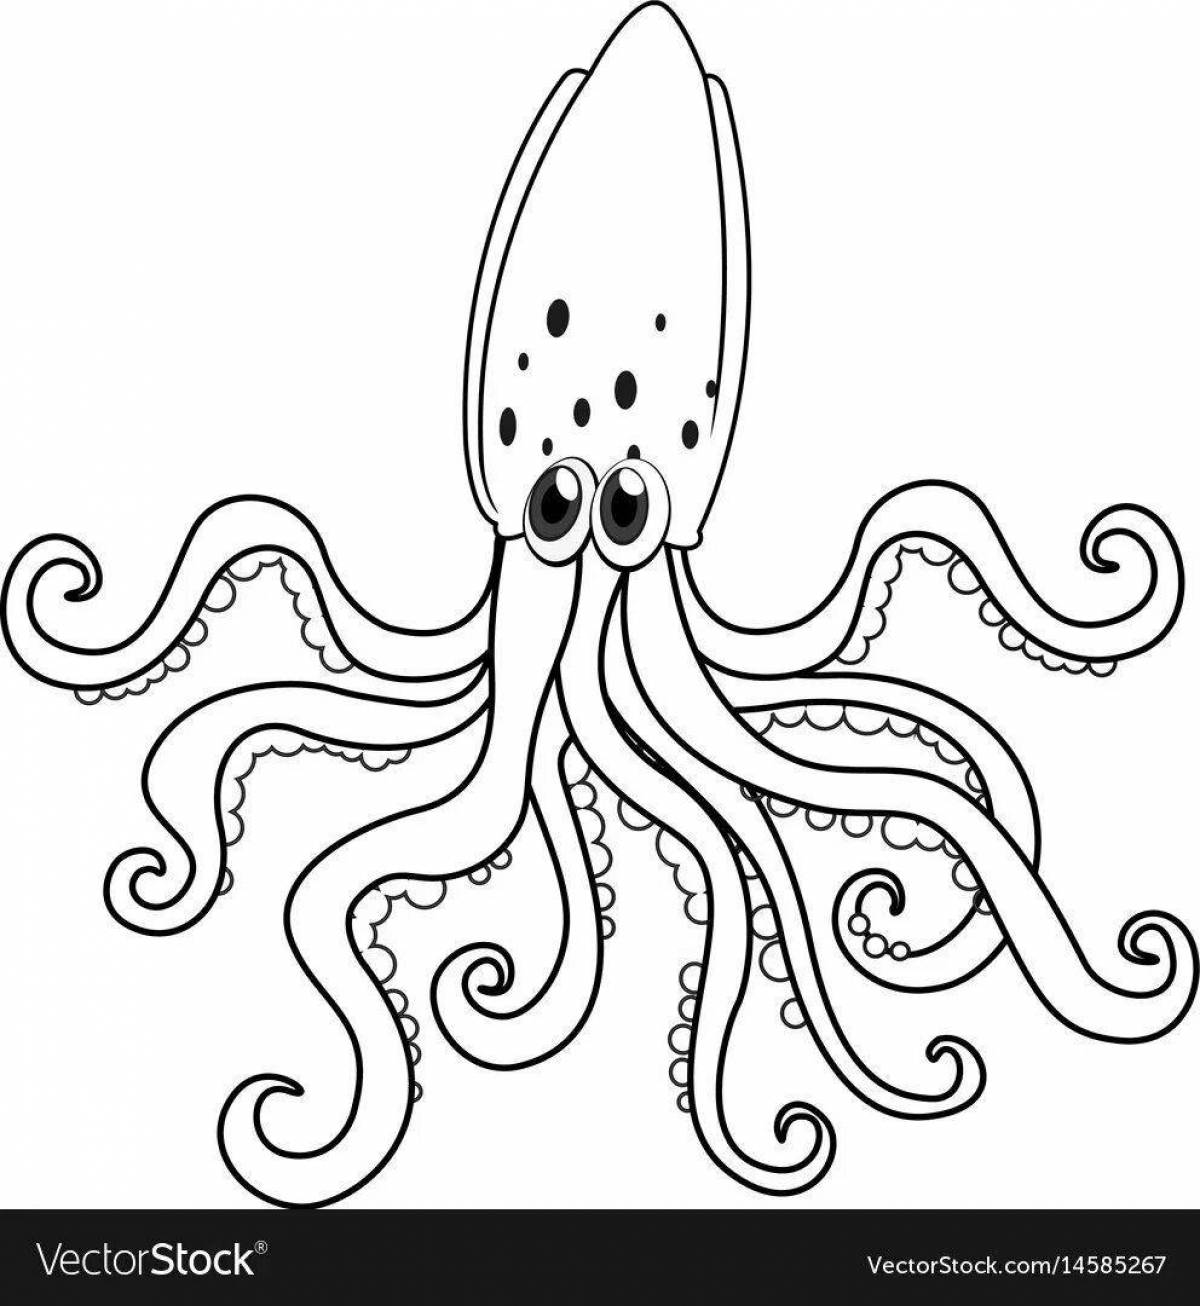 A fun squid coloring game for kids